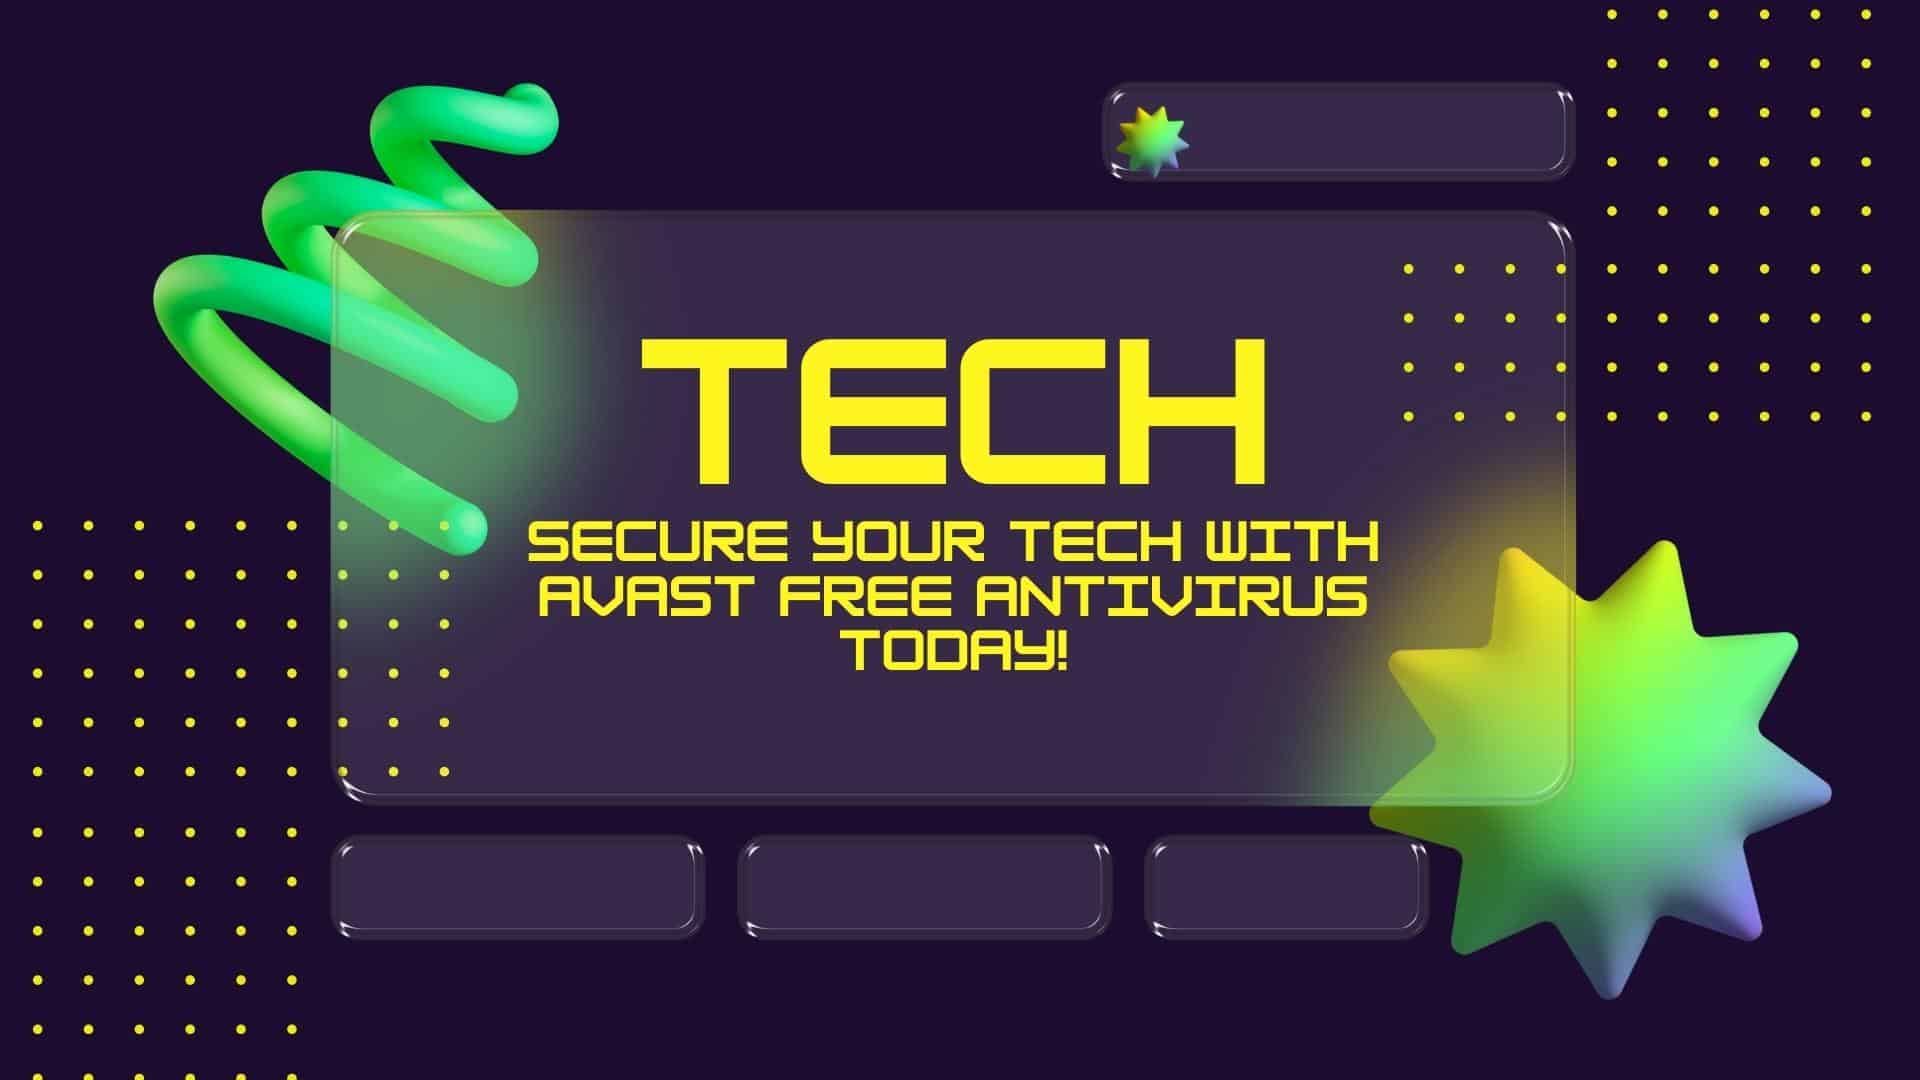 Secure Your Tech with Avast Free Antivirus Today!